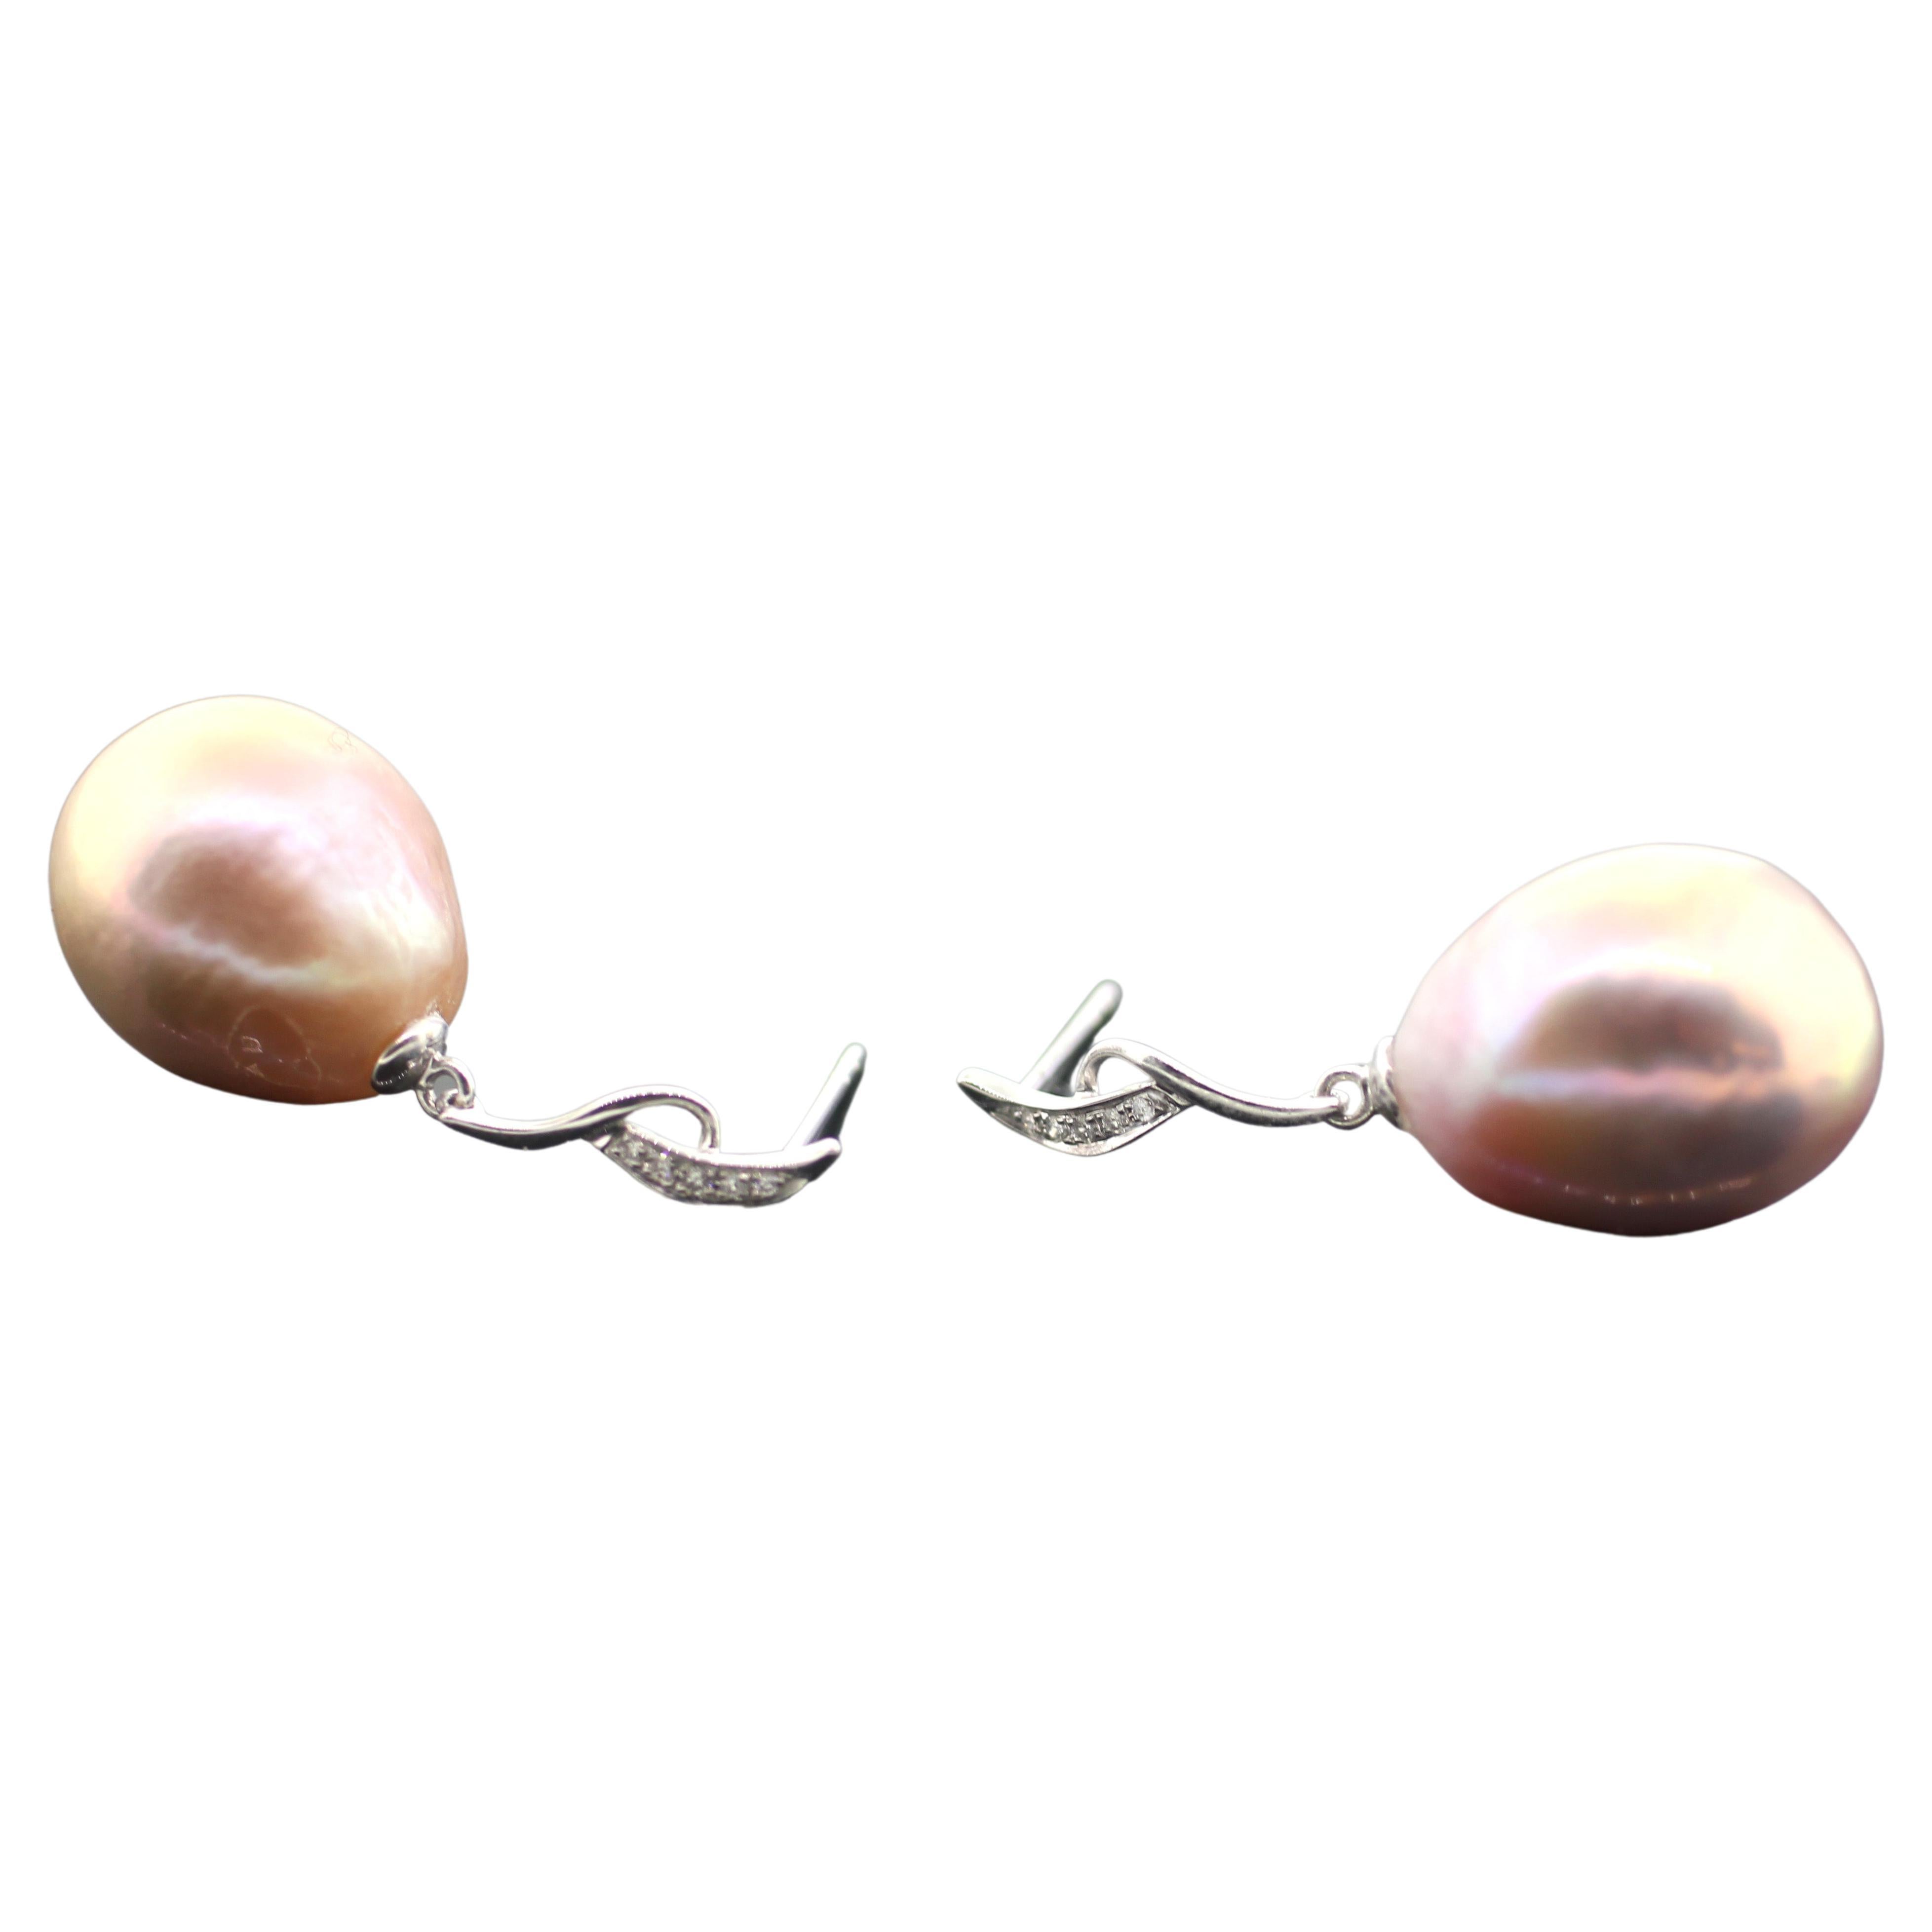 Hakimoto By Jewel Of Ocean
18K White Gold And Diamonds
Total item weight 9.3 grams
16x14 mm Cultured Baroque Cultured Pearls
18K White Gold High Polish
Orient: Very Good
Luster: Very Good
Nacre: Very Good
Manufacture Suggested Retail Price $3,000